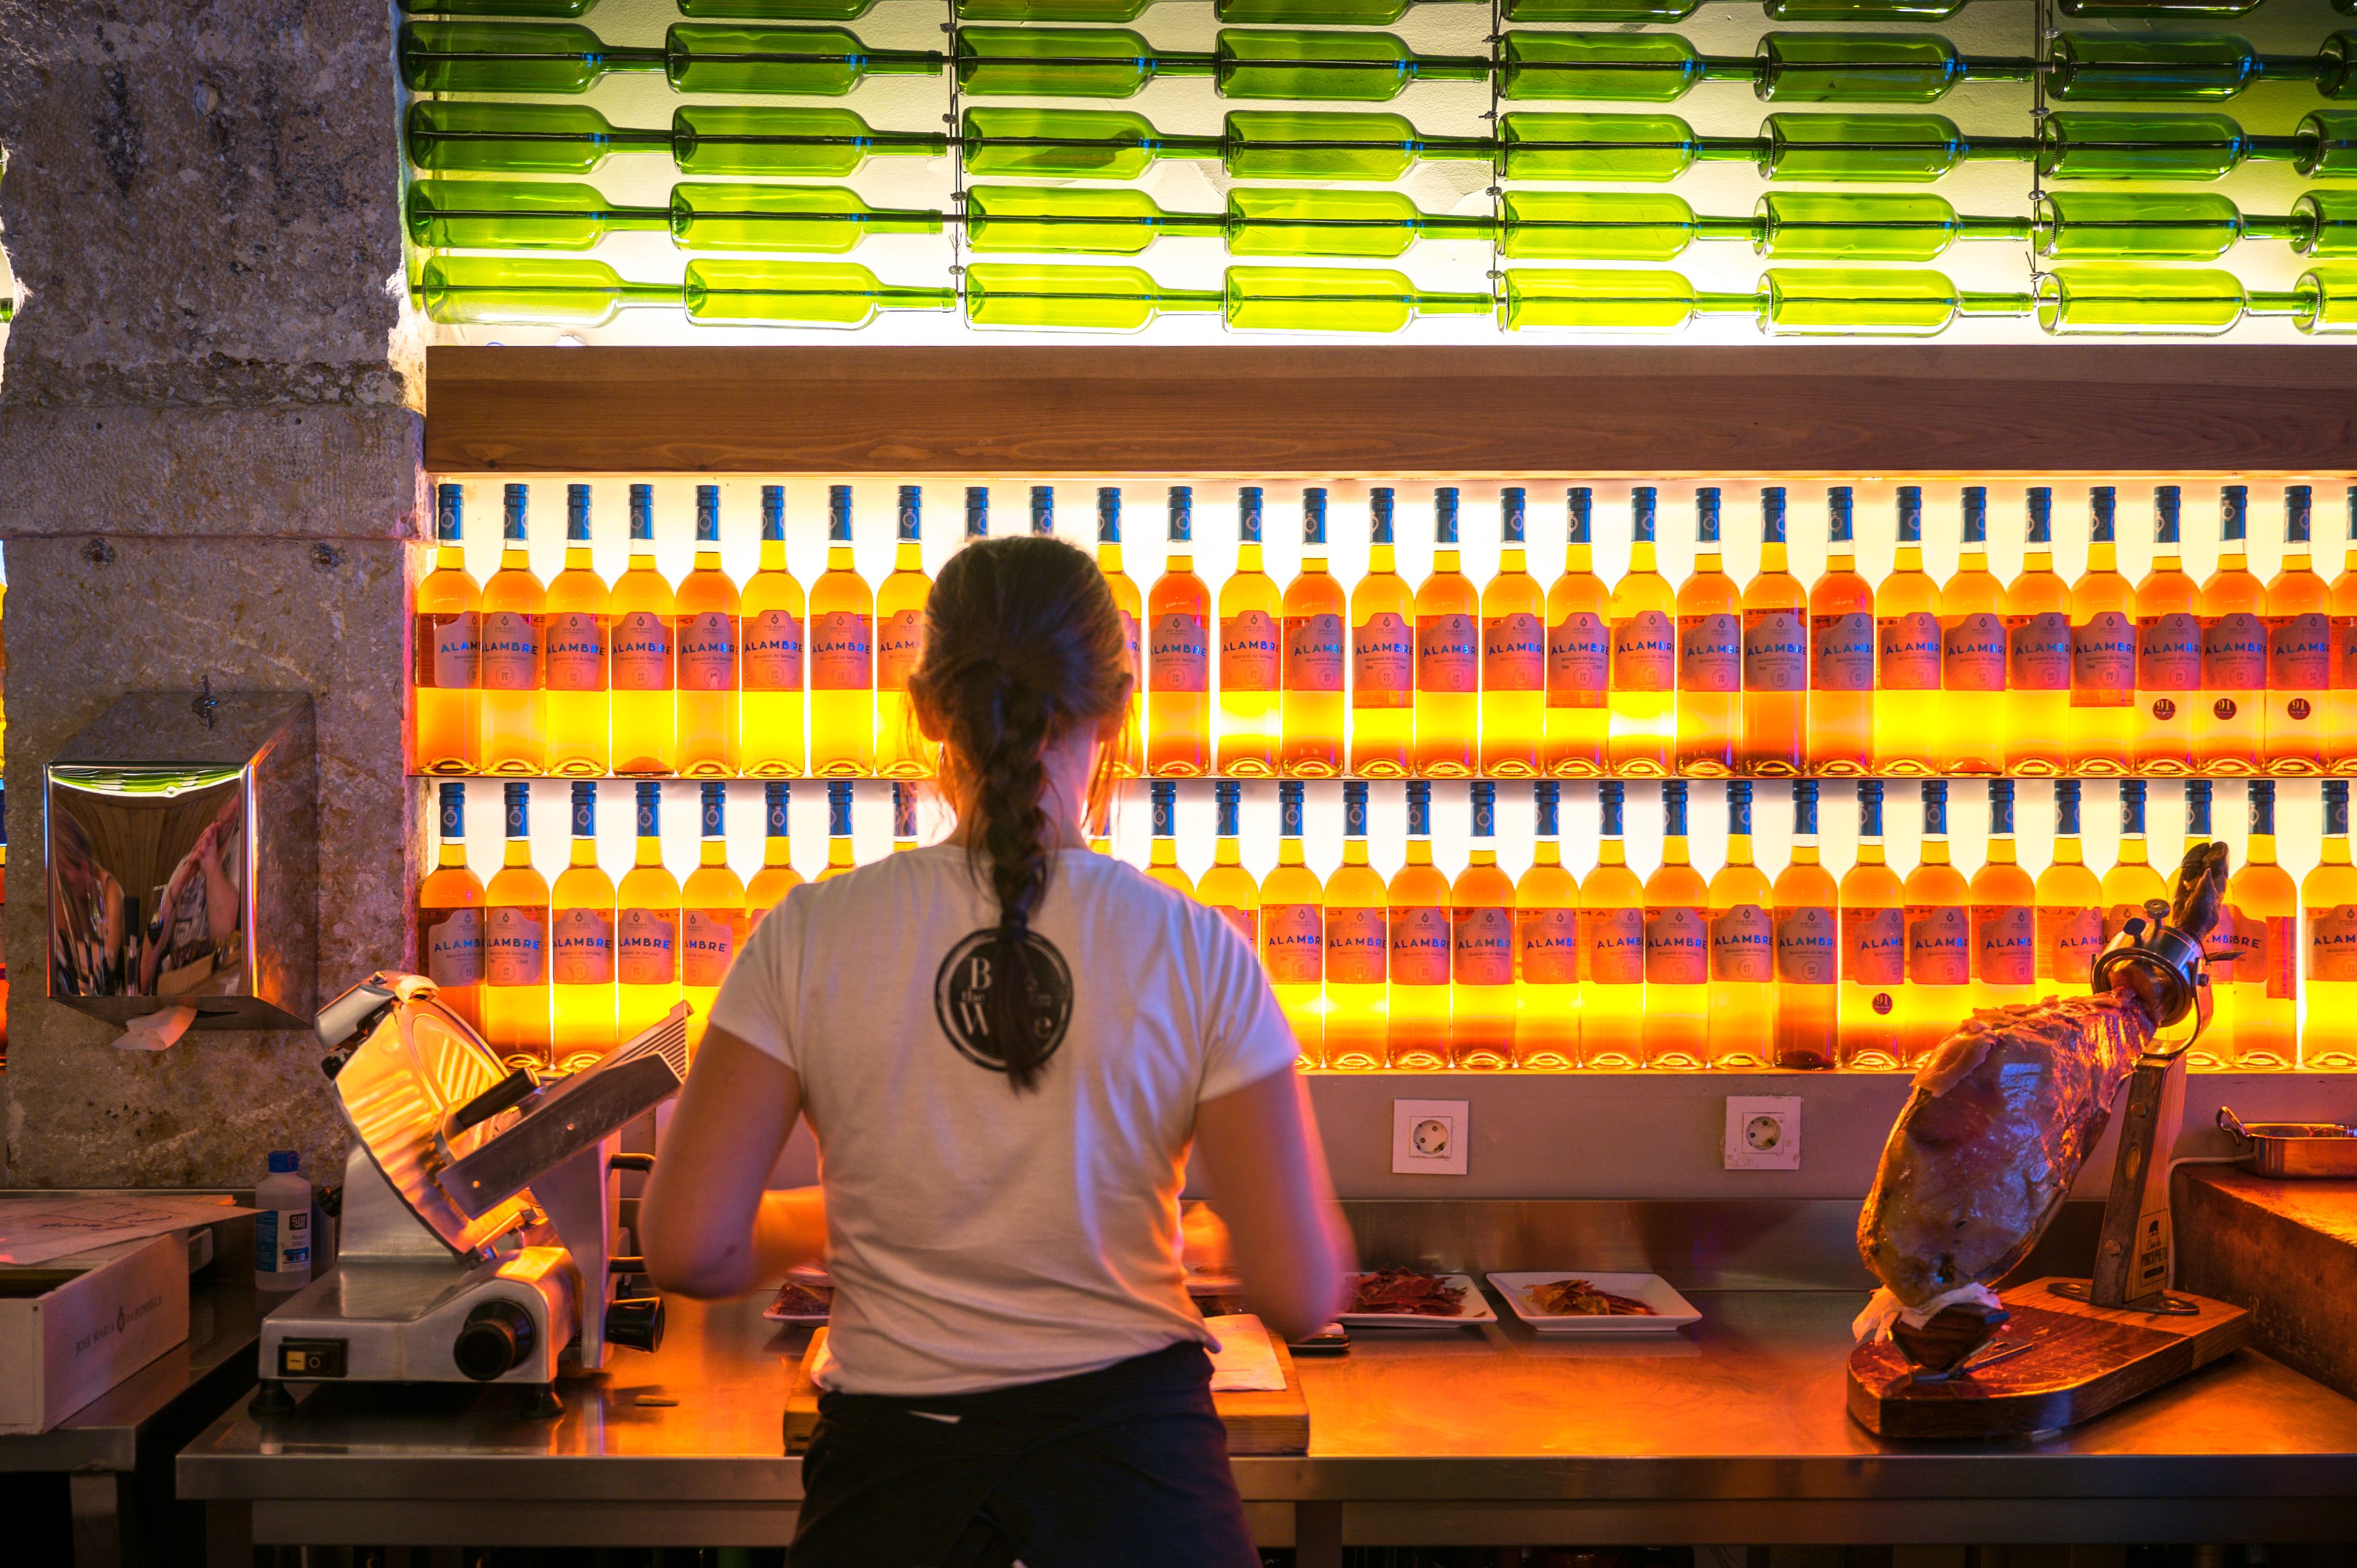 Server stands with back to camera and colorful backlit wine bottles covering wall